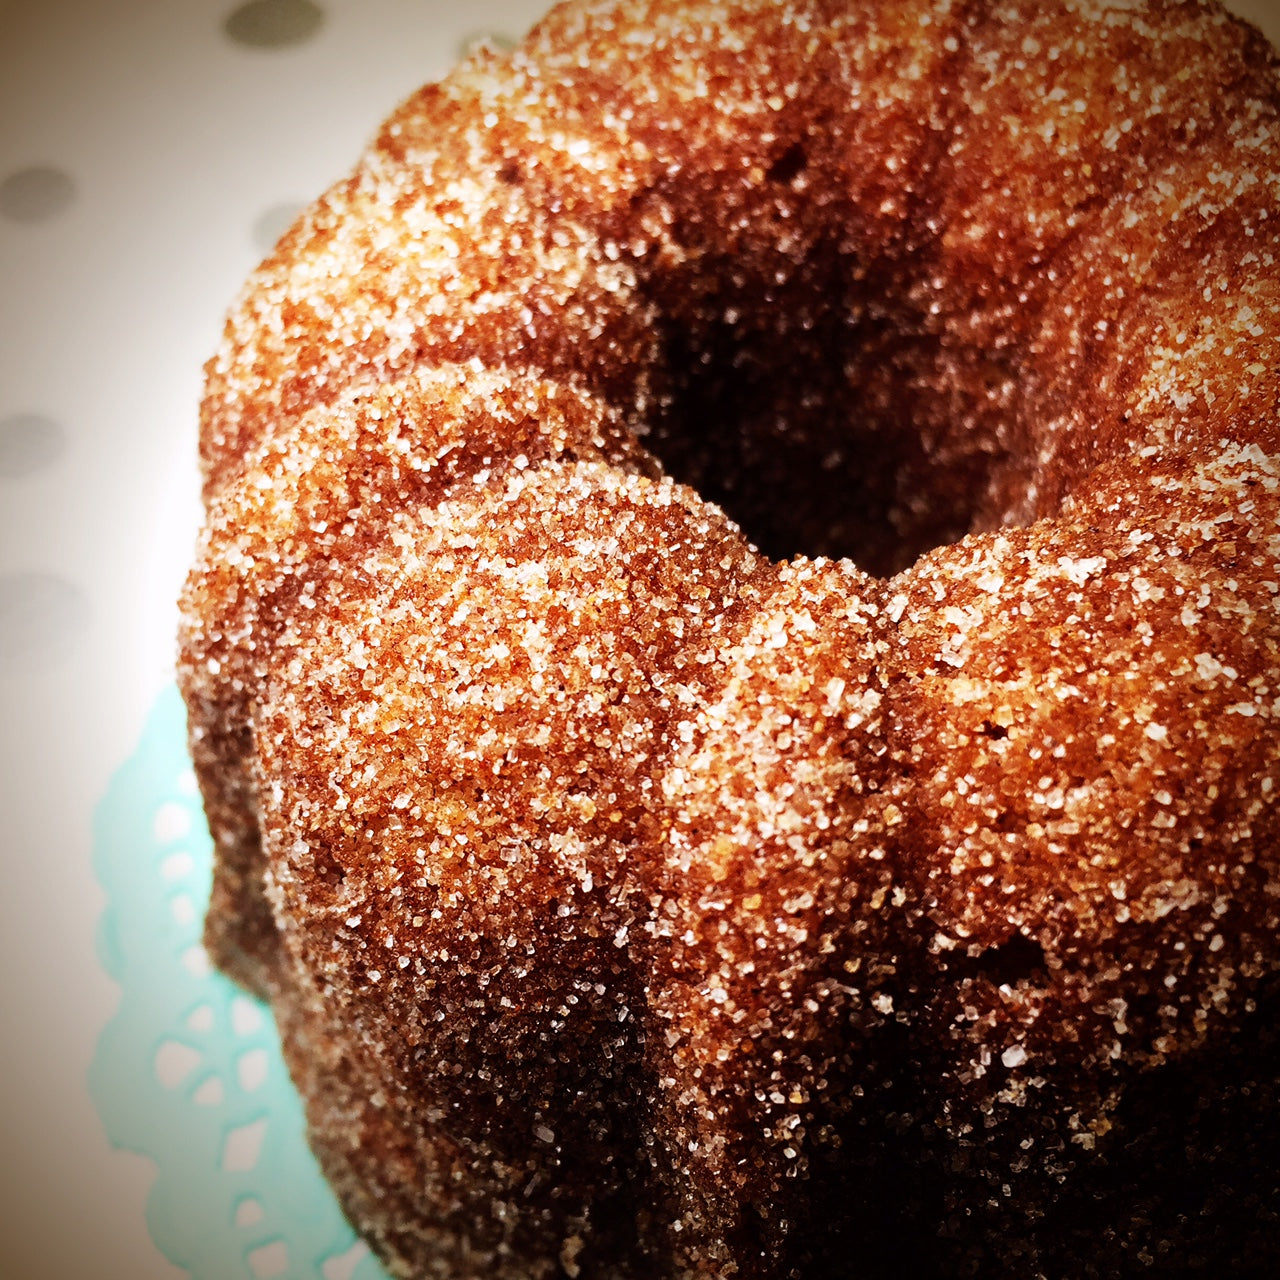 all spice bundt cake with horchata glaze dusted in cinnamon sugar